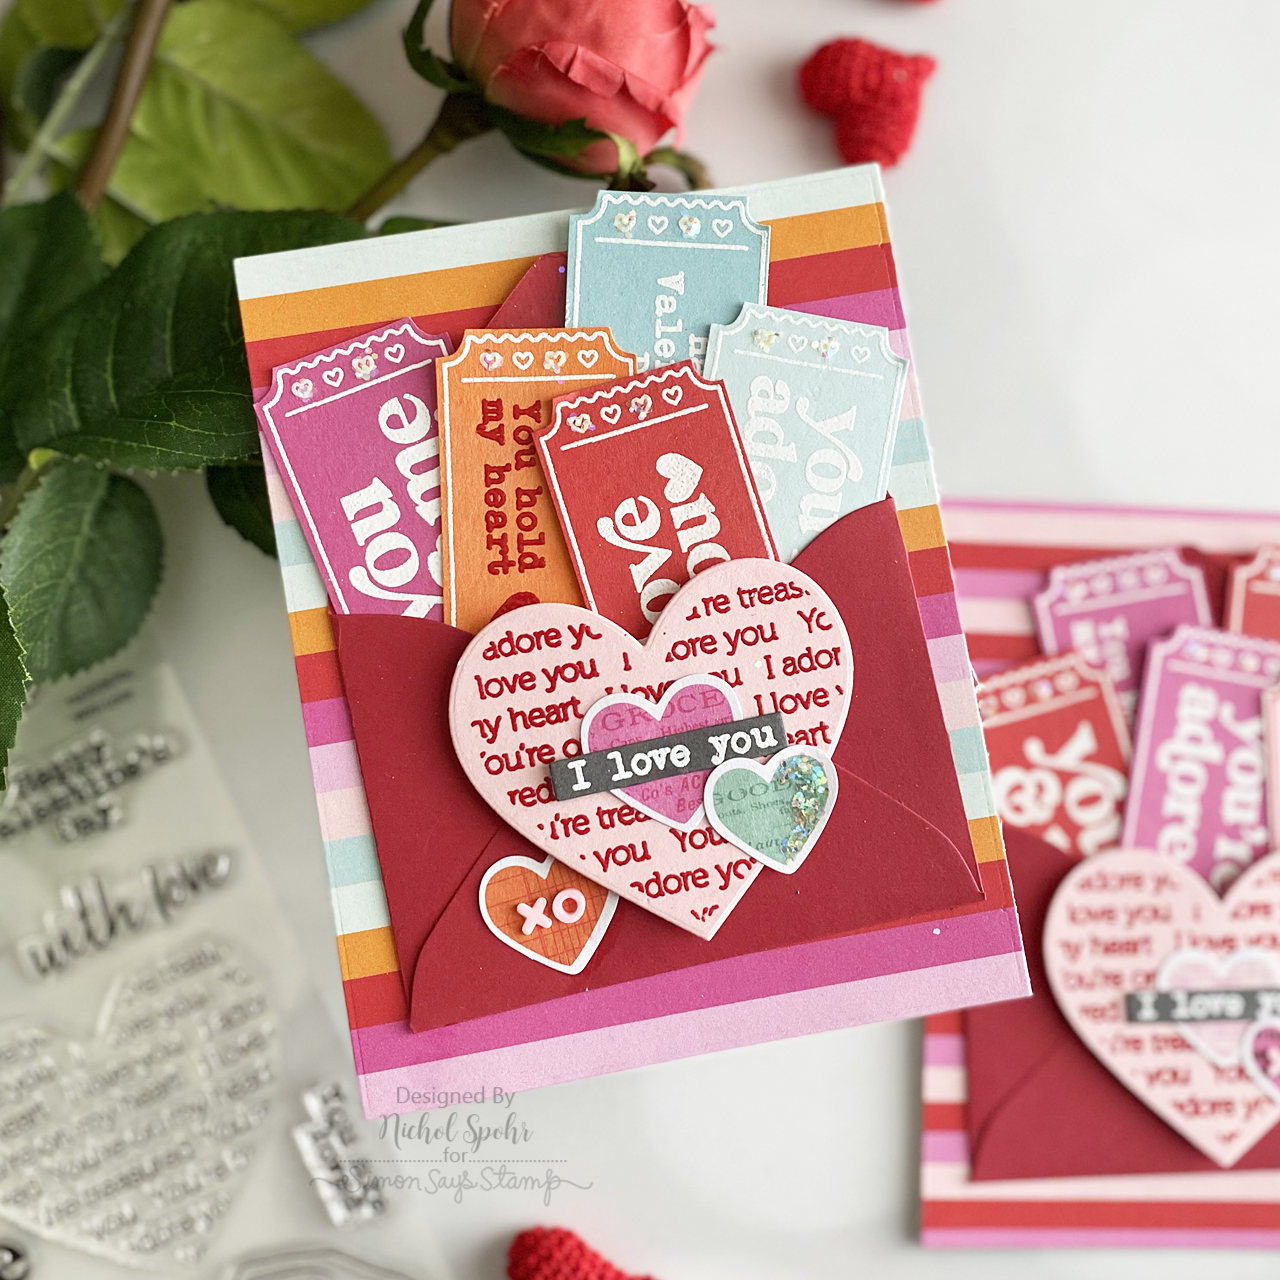 Simon Says Stamp Limited Edition Valentine’s Card Kit Inspiration ...